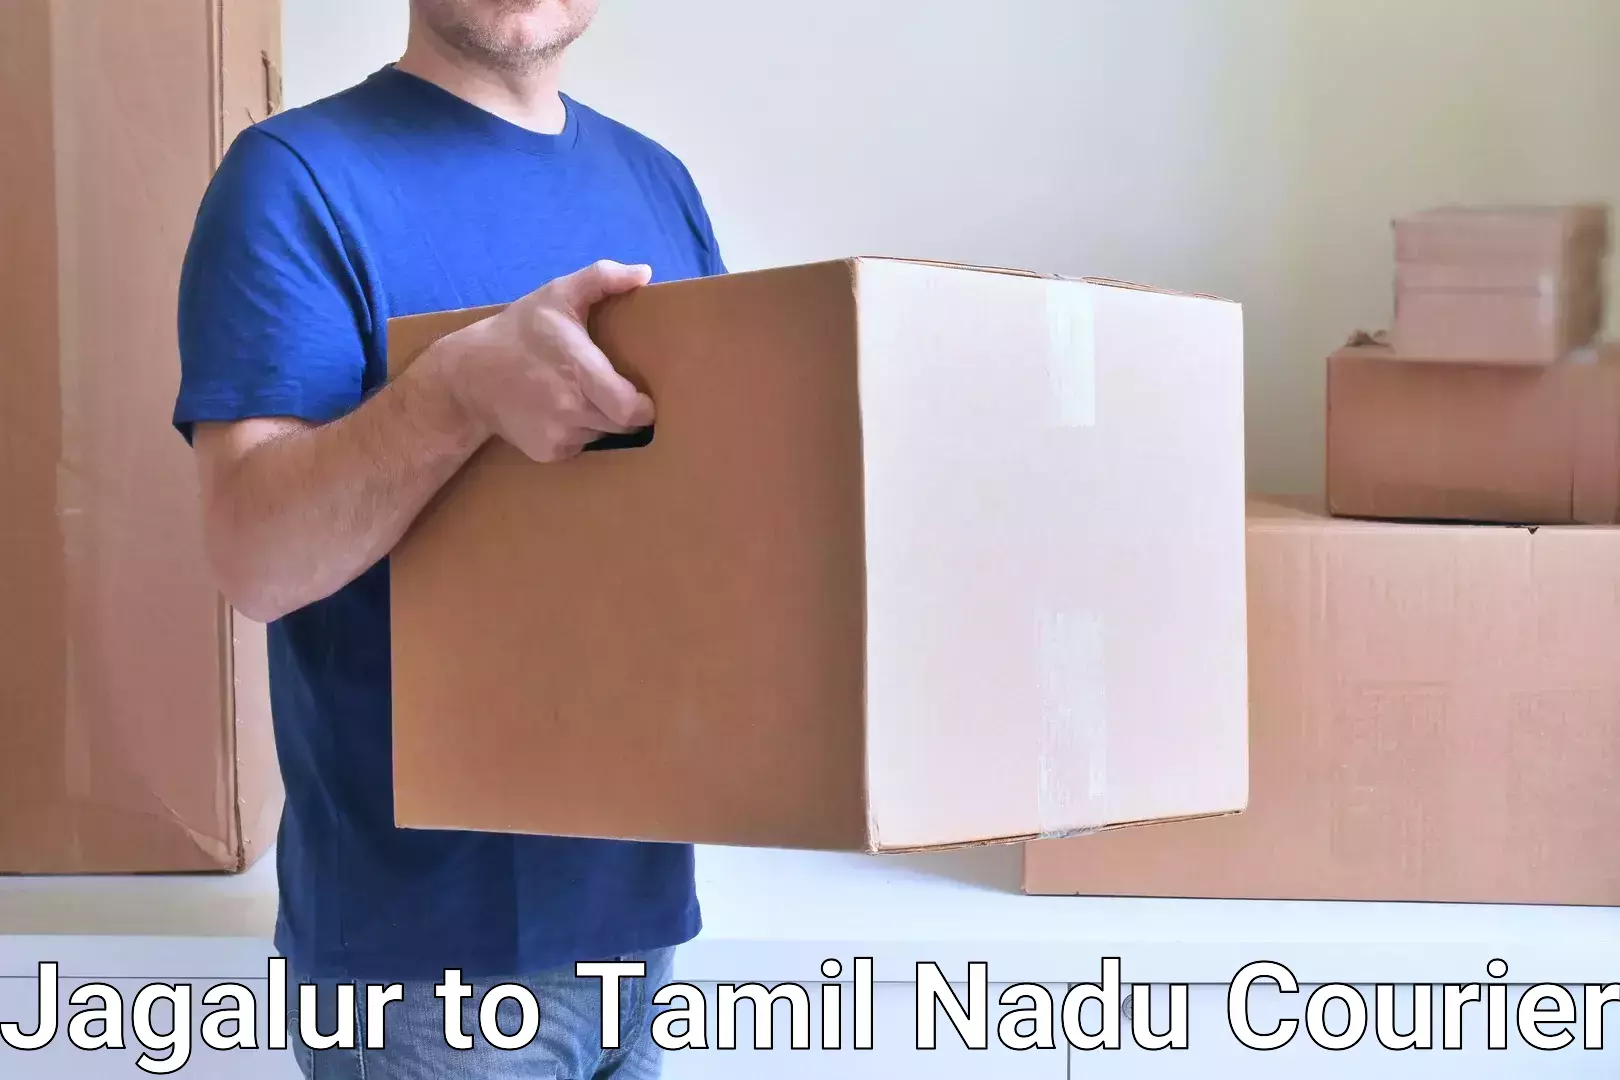 Personalized courier experiences Jagalur to Perunali